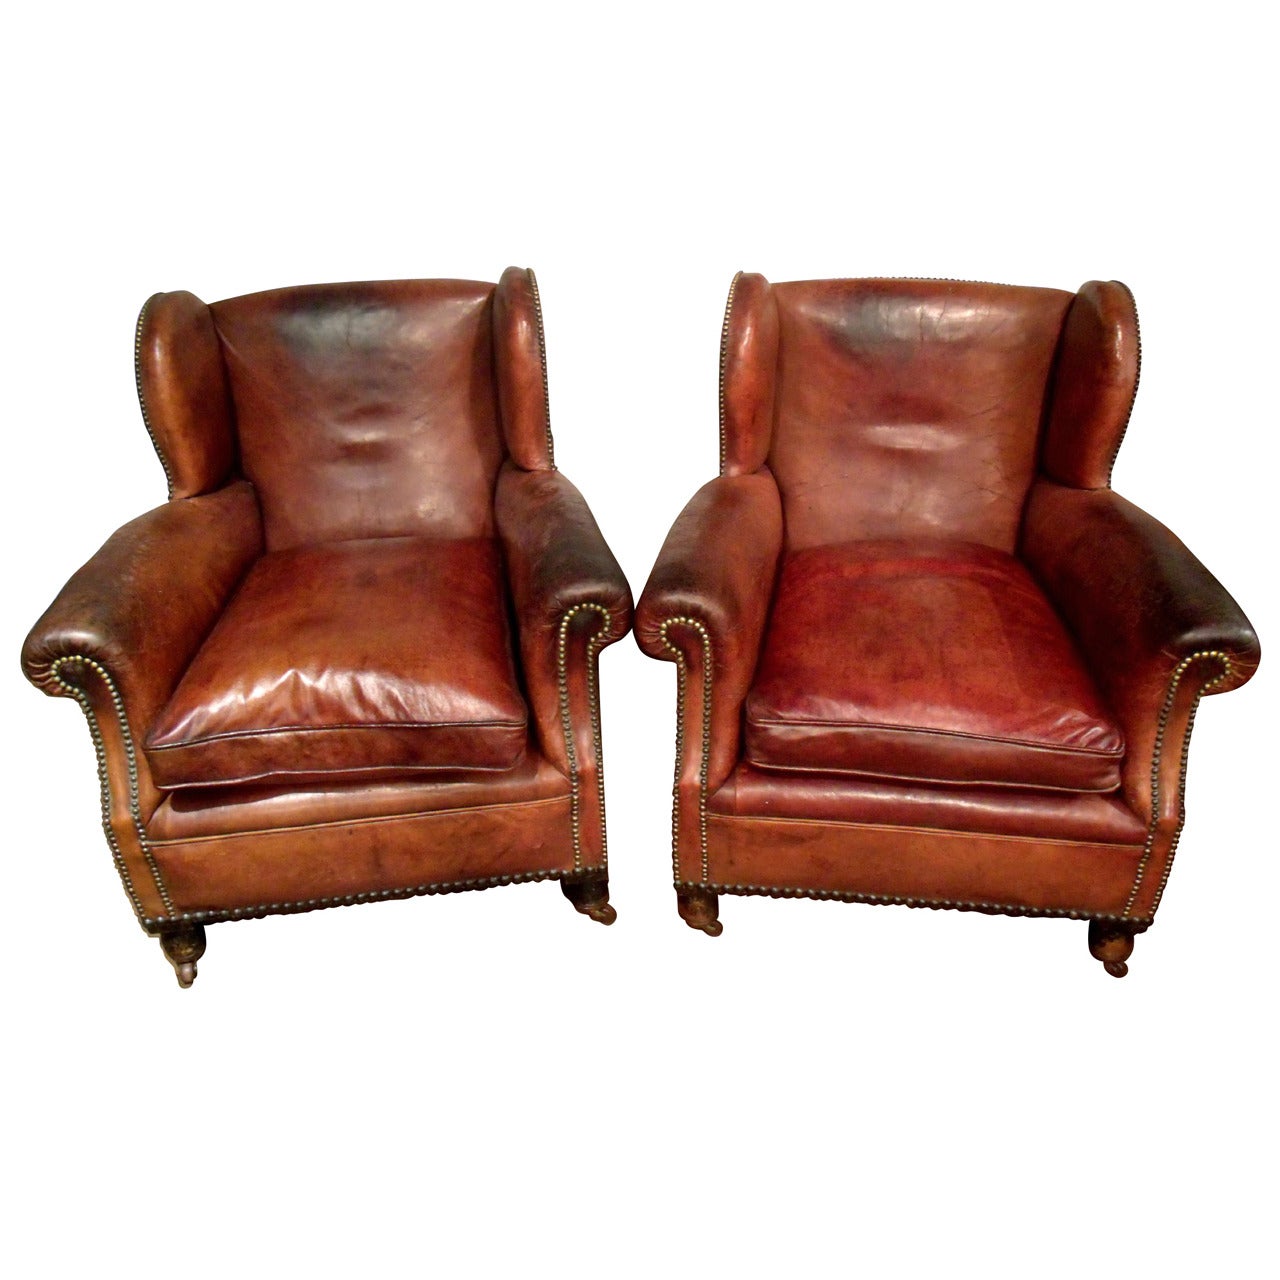 Pair of Victorian Gentlemen's Leather Club Chairs